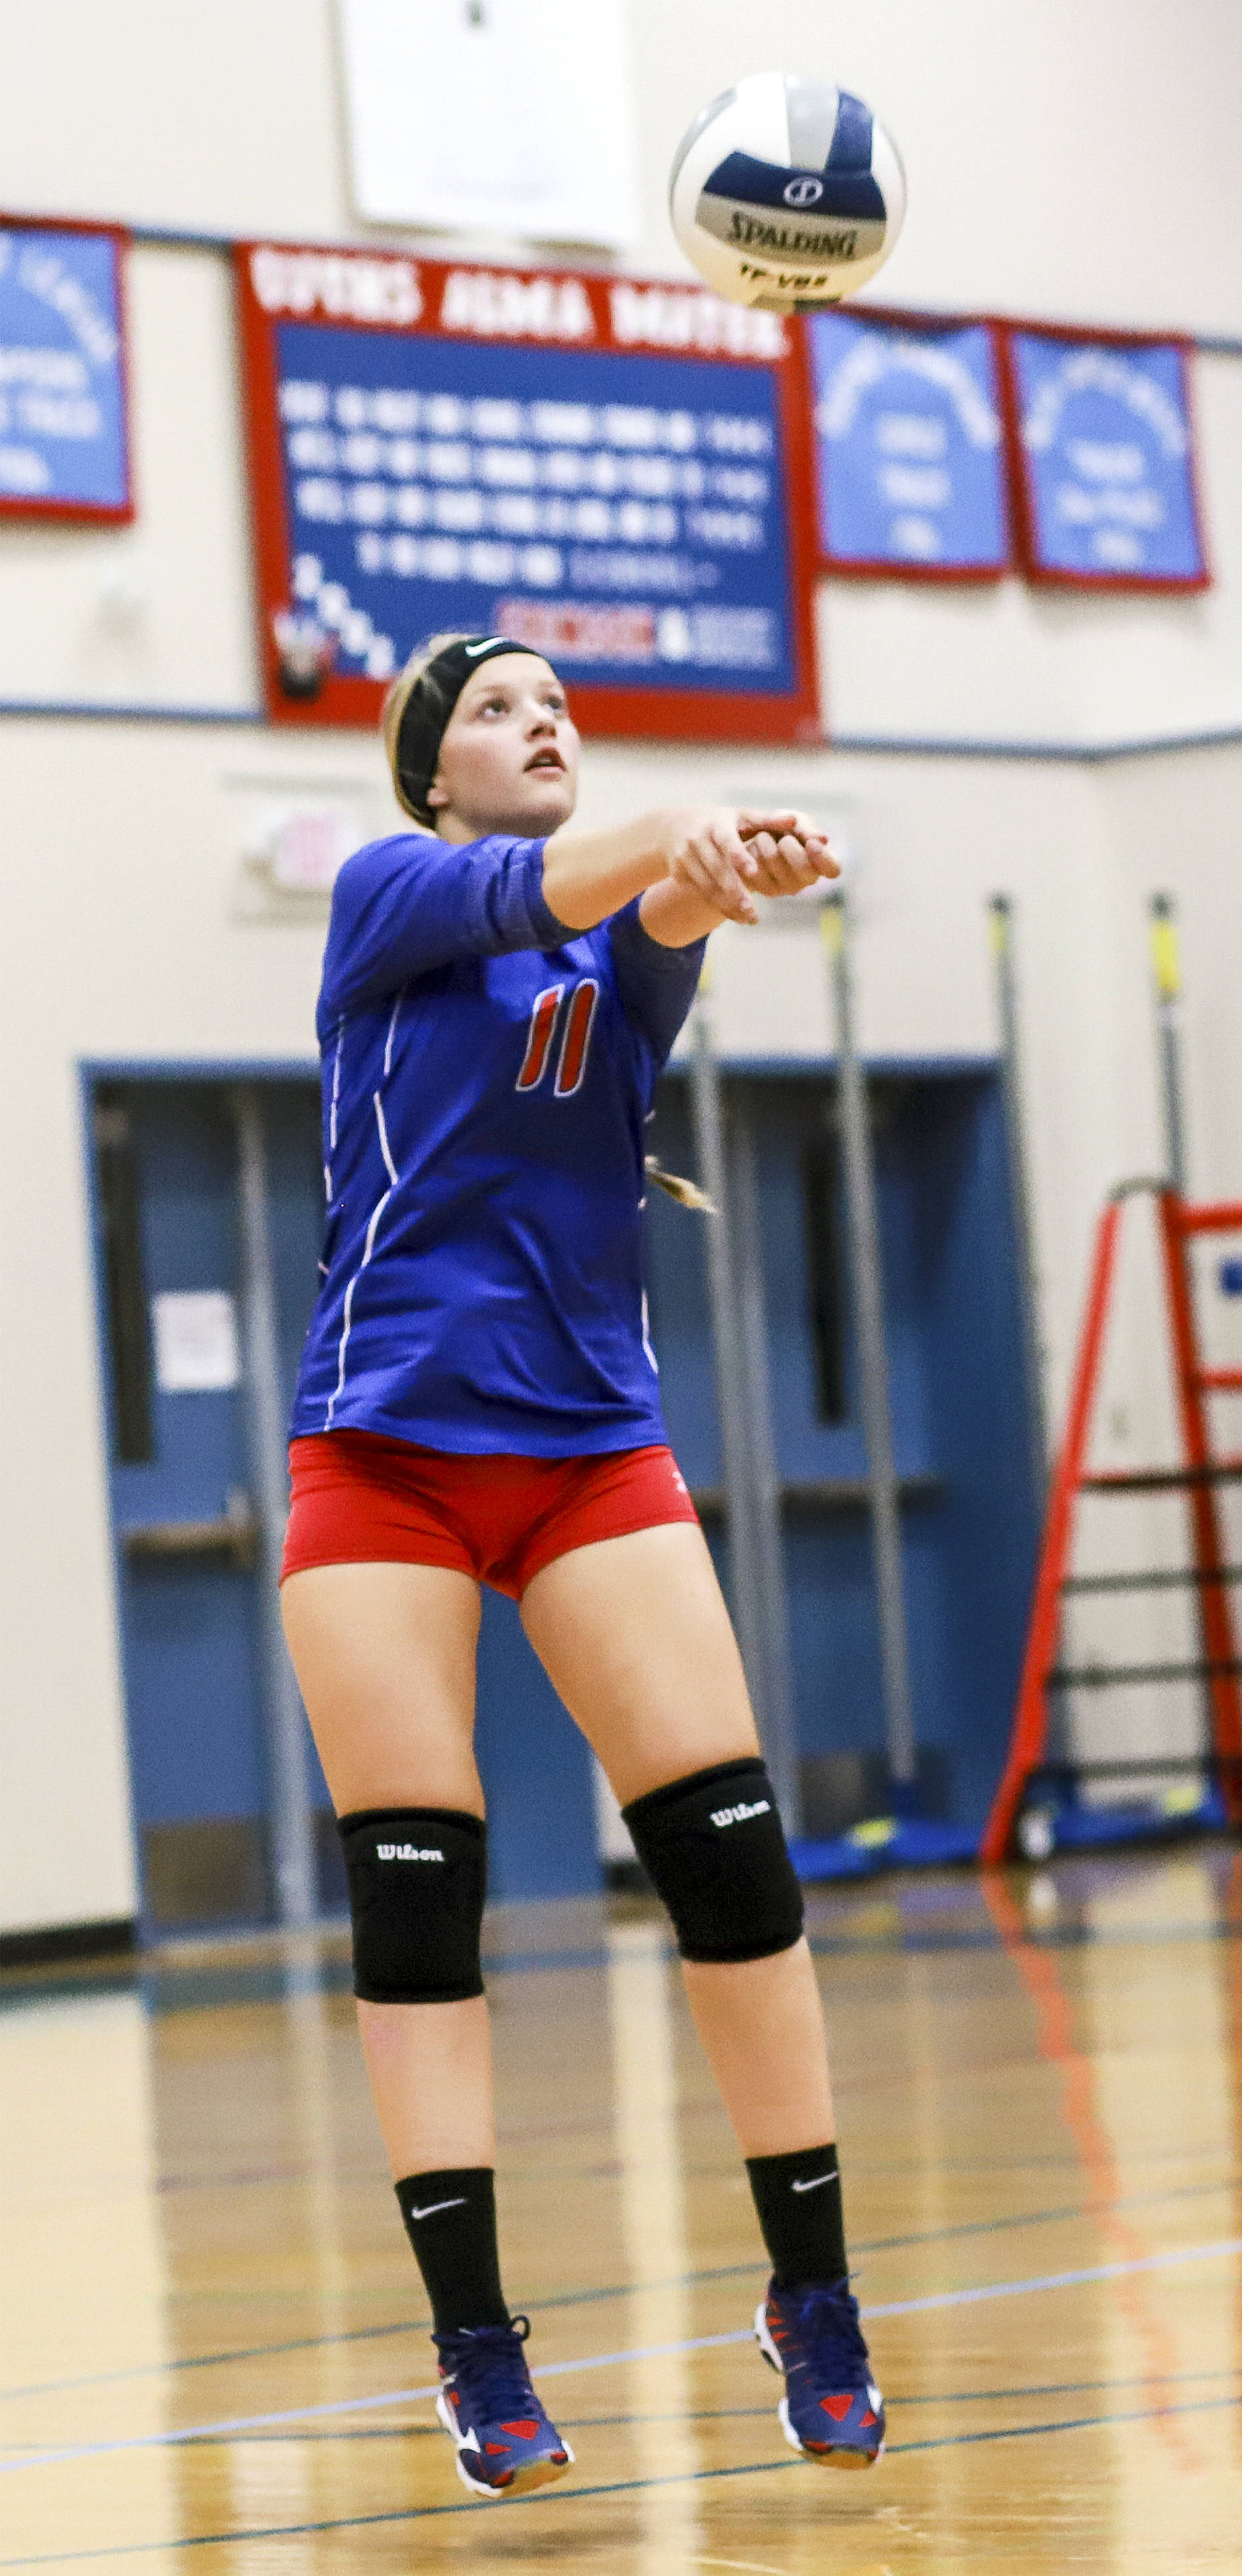 Willapa Valley’s Katie Adkins, seen here in a file photo, had six digs and 100% service as the Vikings defeated Ilwaco 3-0 on Thursday at Willapa Valley High School. (Photo by Larry Bale)